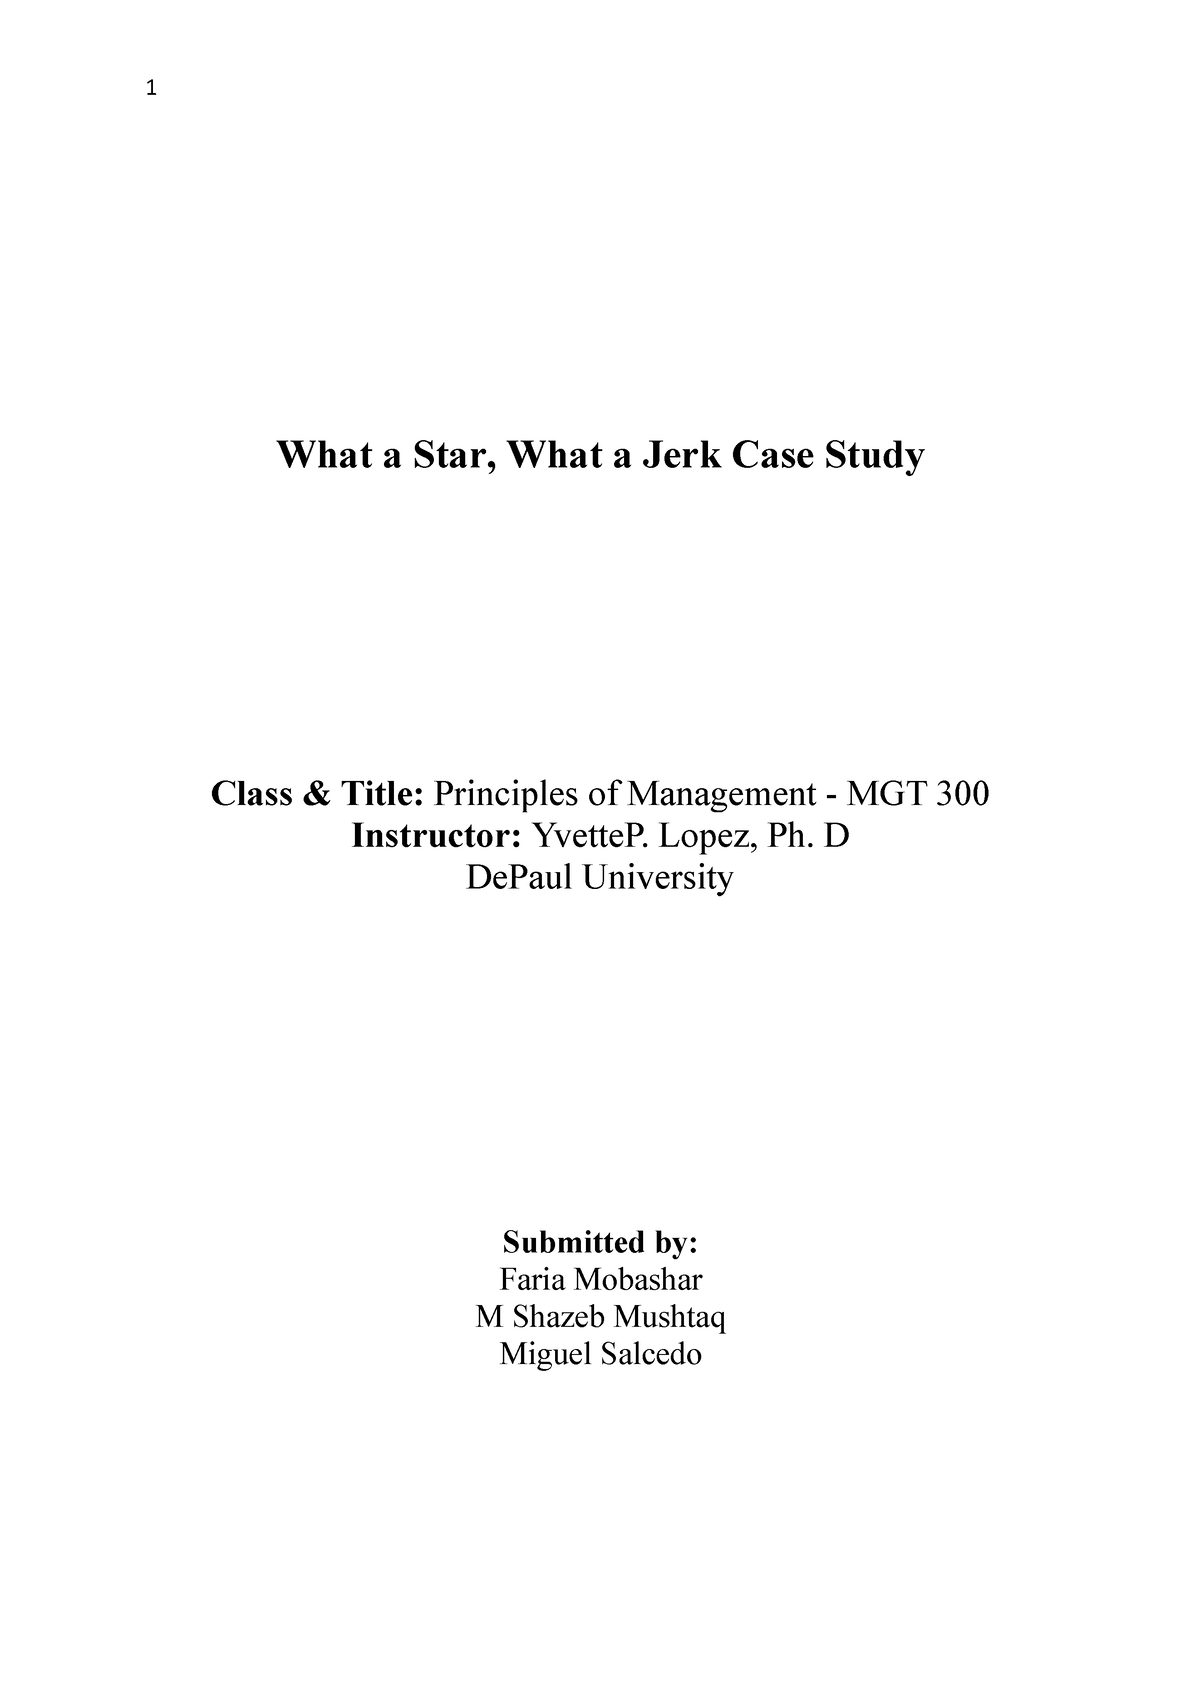 what a star what a jerk case study summary